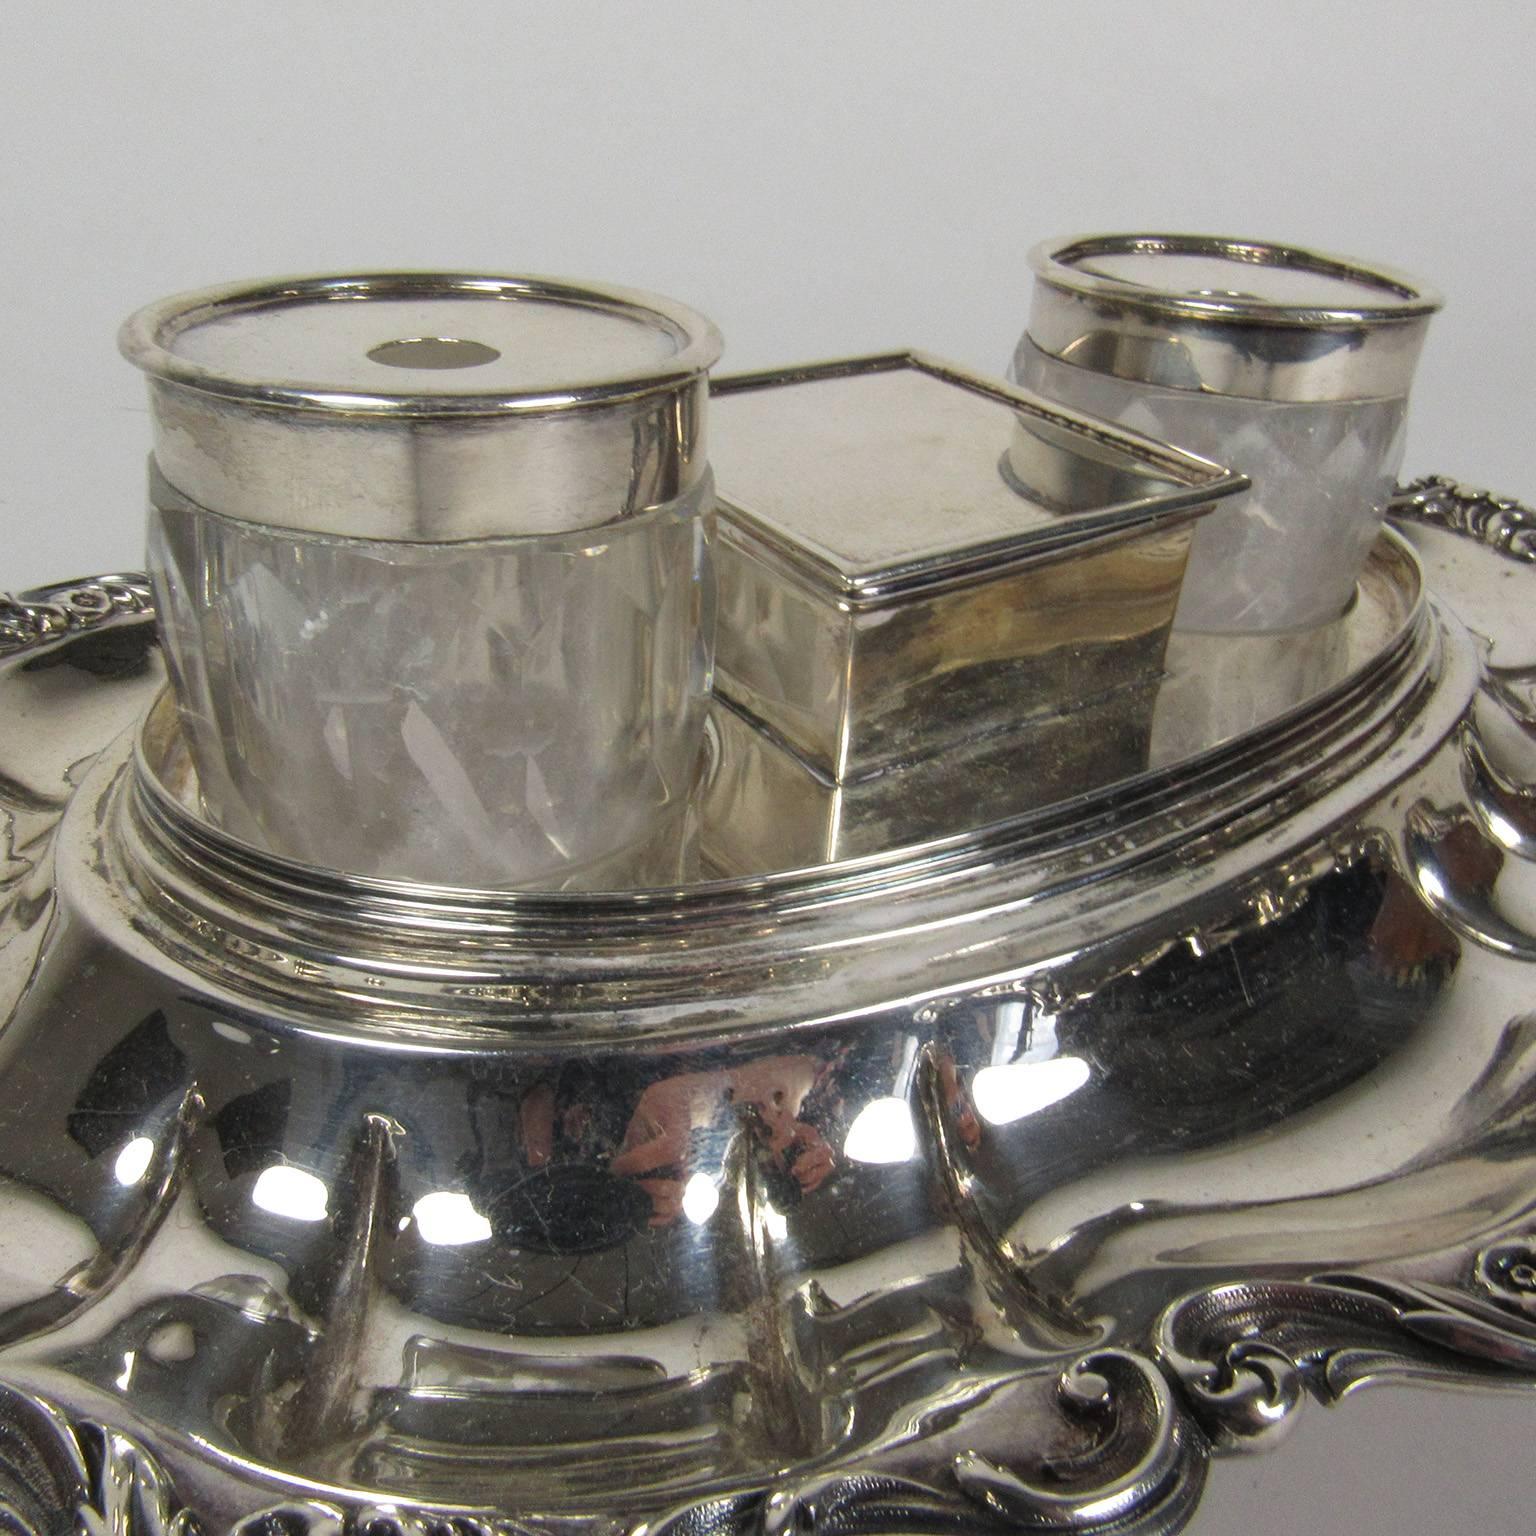 William IV sterling silver double inkwell with hallmarks for James Charles Edington, maker, London, 1837. Measures: Length 10 inches.